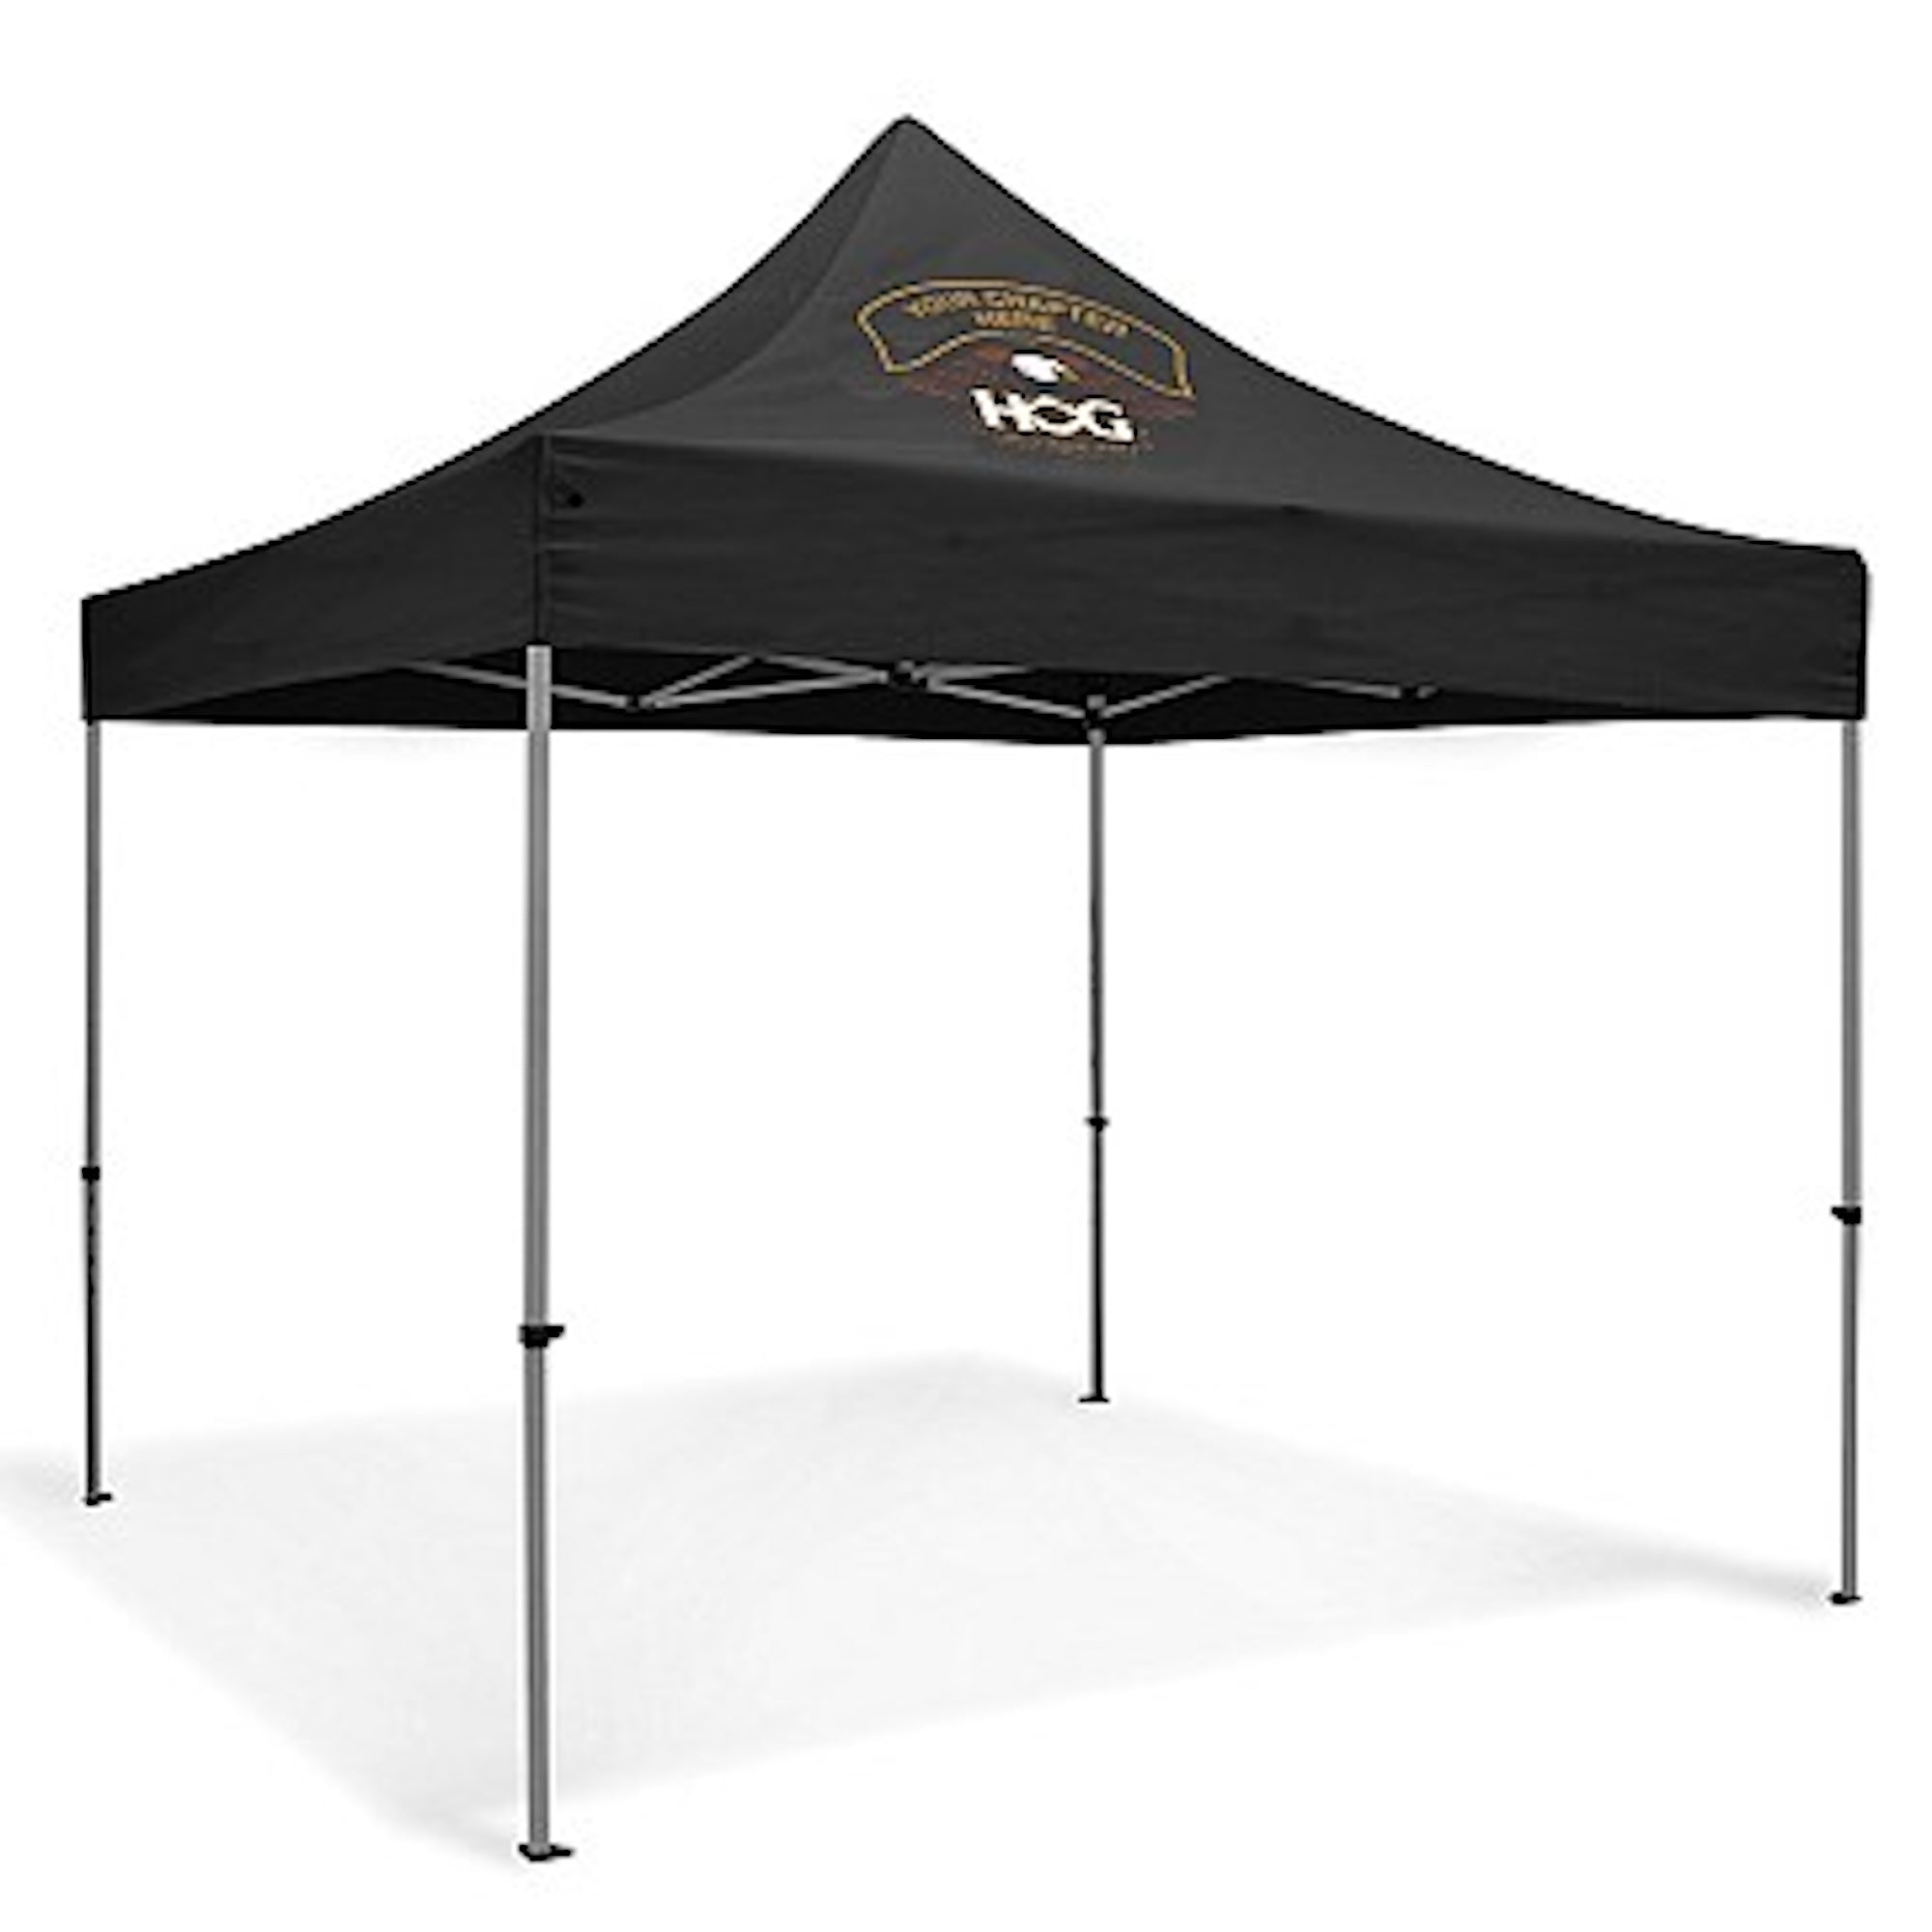 3 x 3 Tent With H.O.G. Eagle Logo